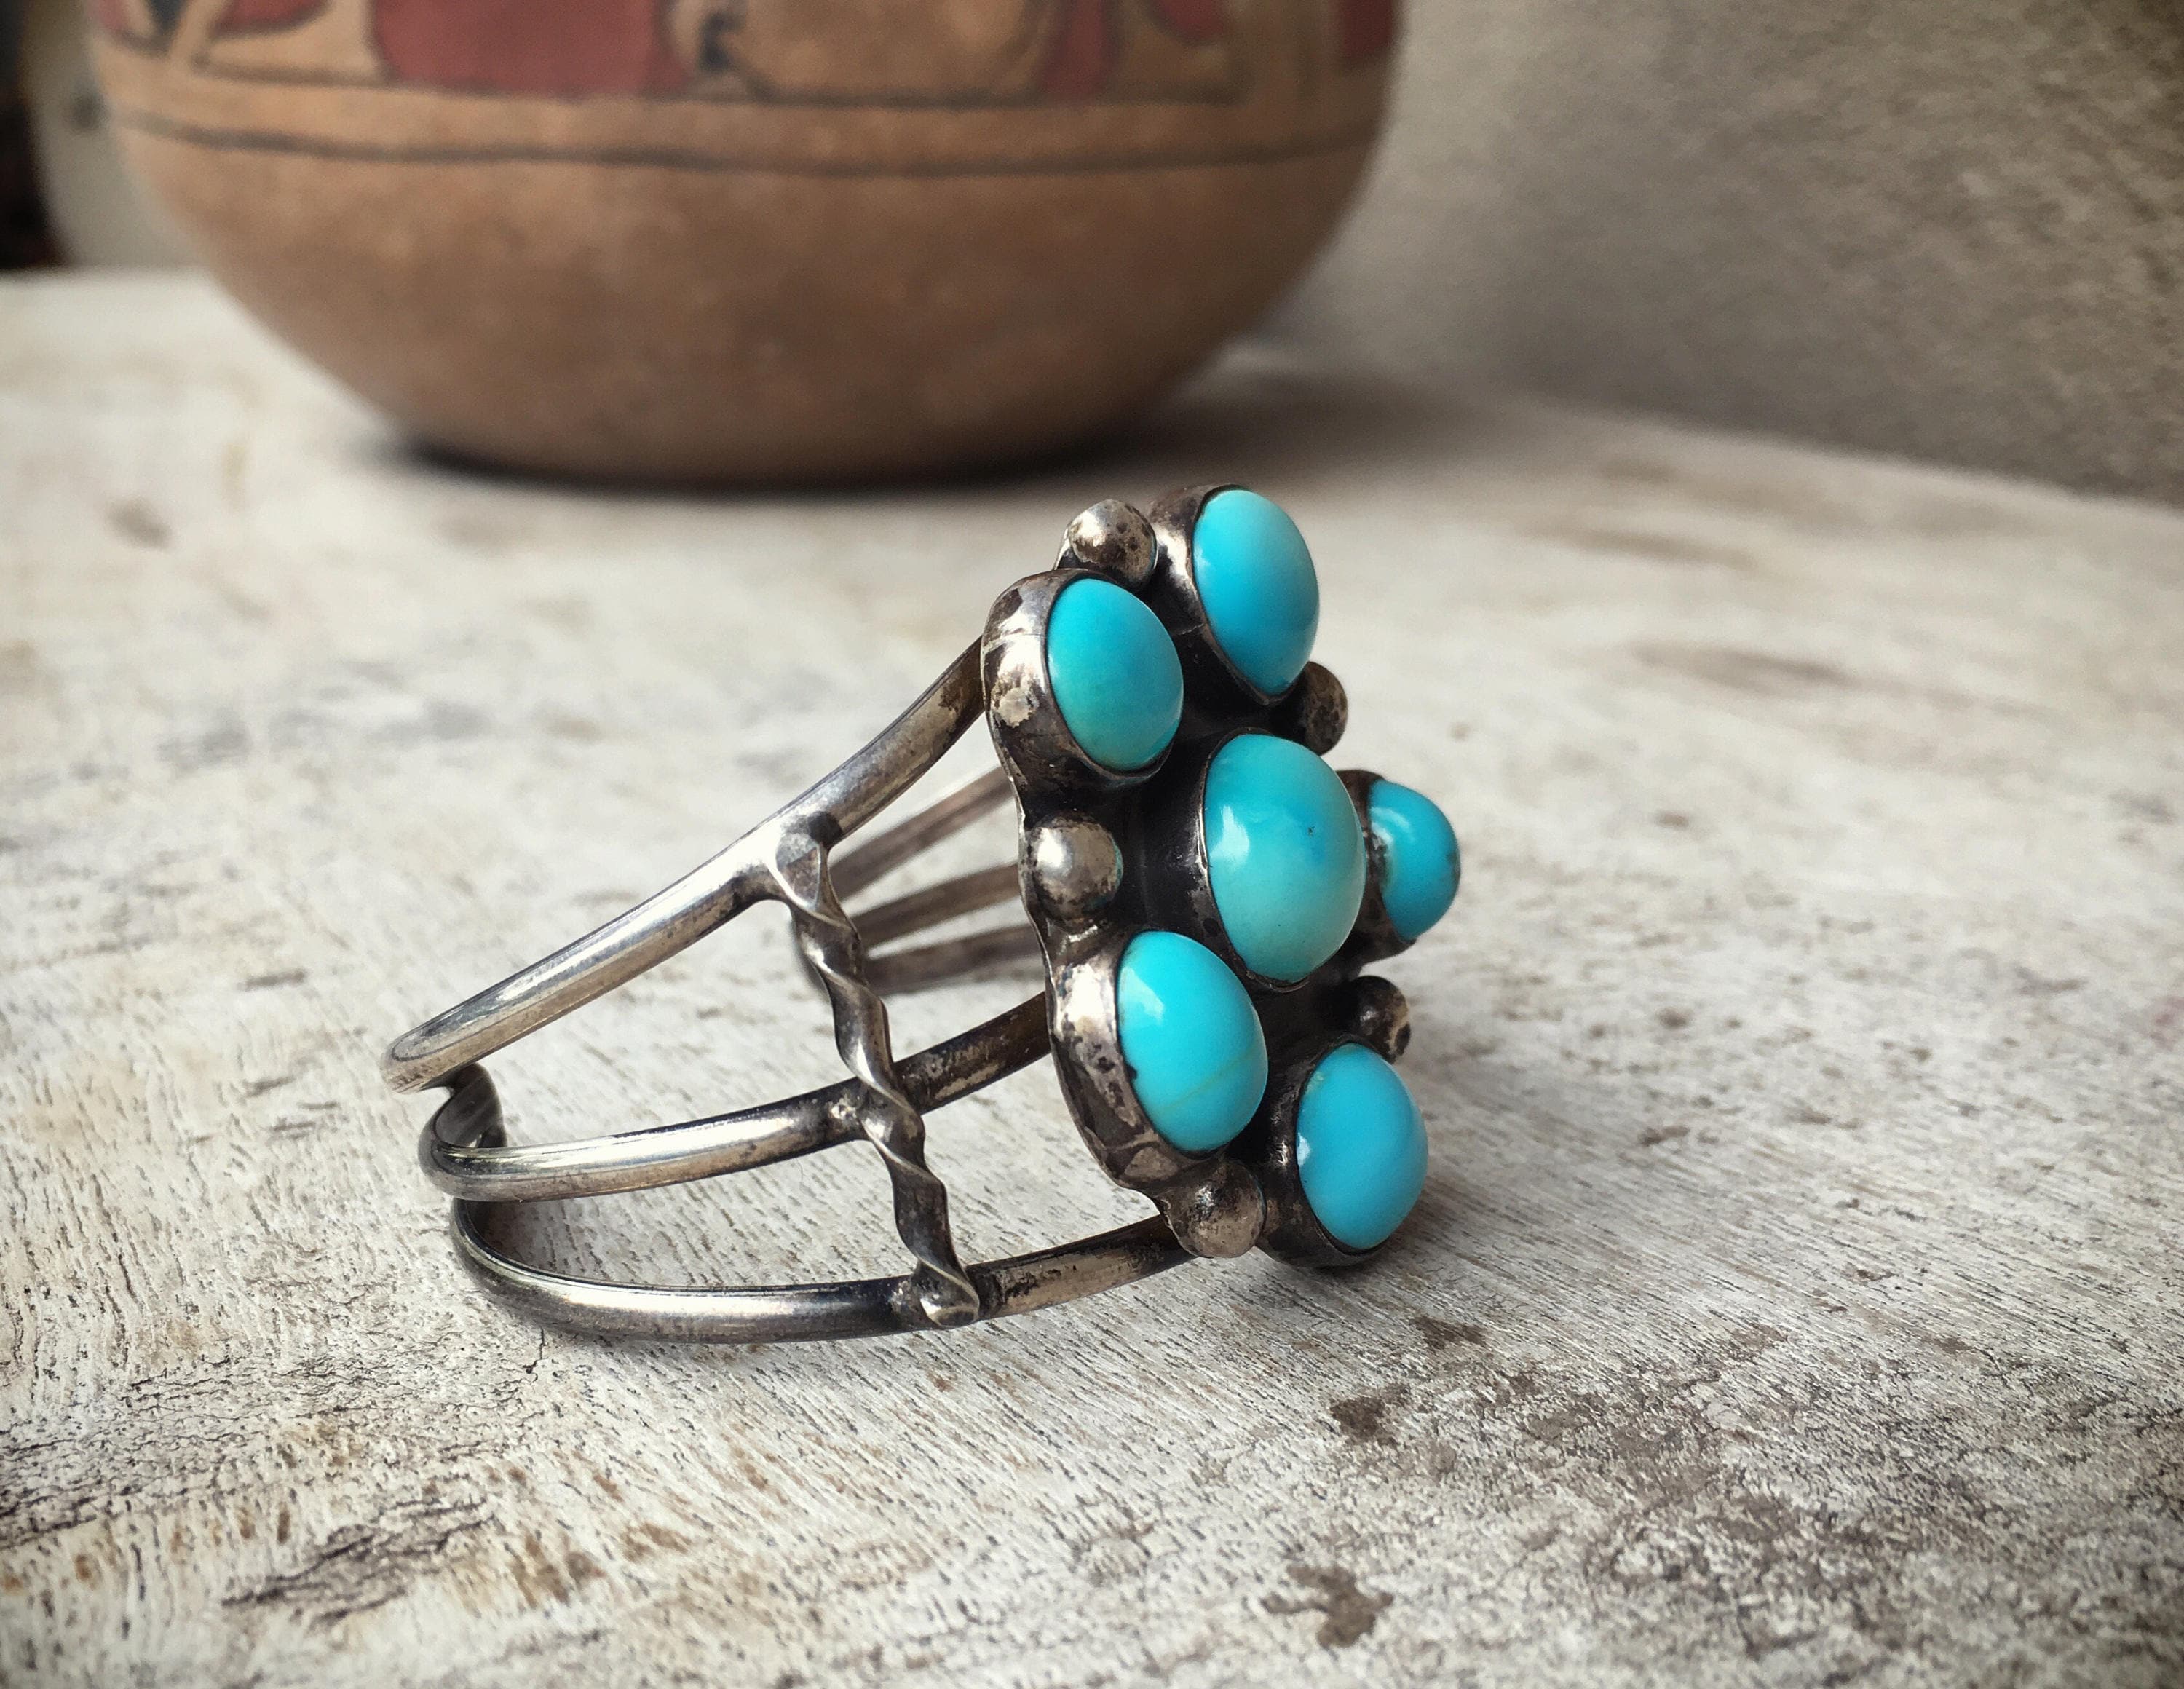 Vintage Turquoise Bracelet for Women w/ Small Wrist, Signed Navajo  Turquoise Cluster Cuff